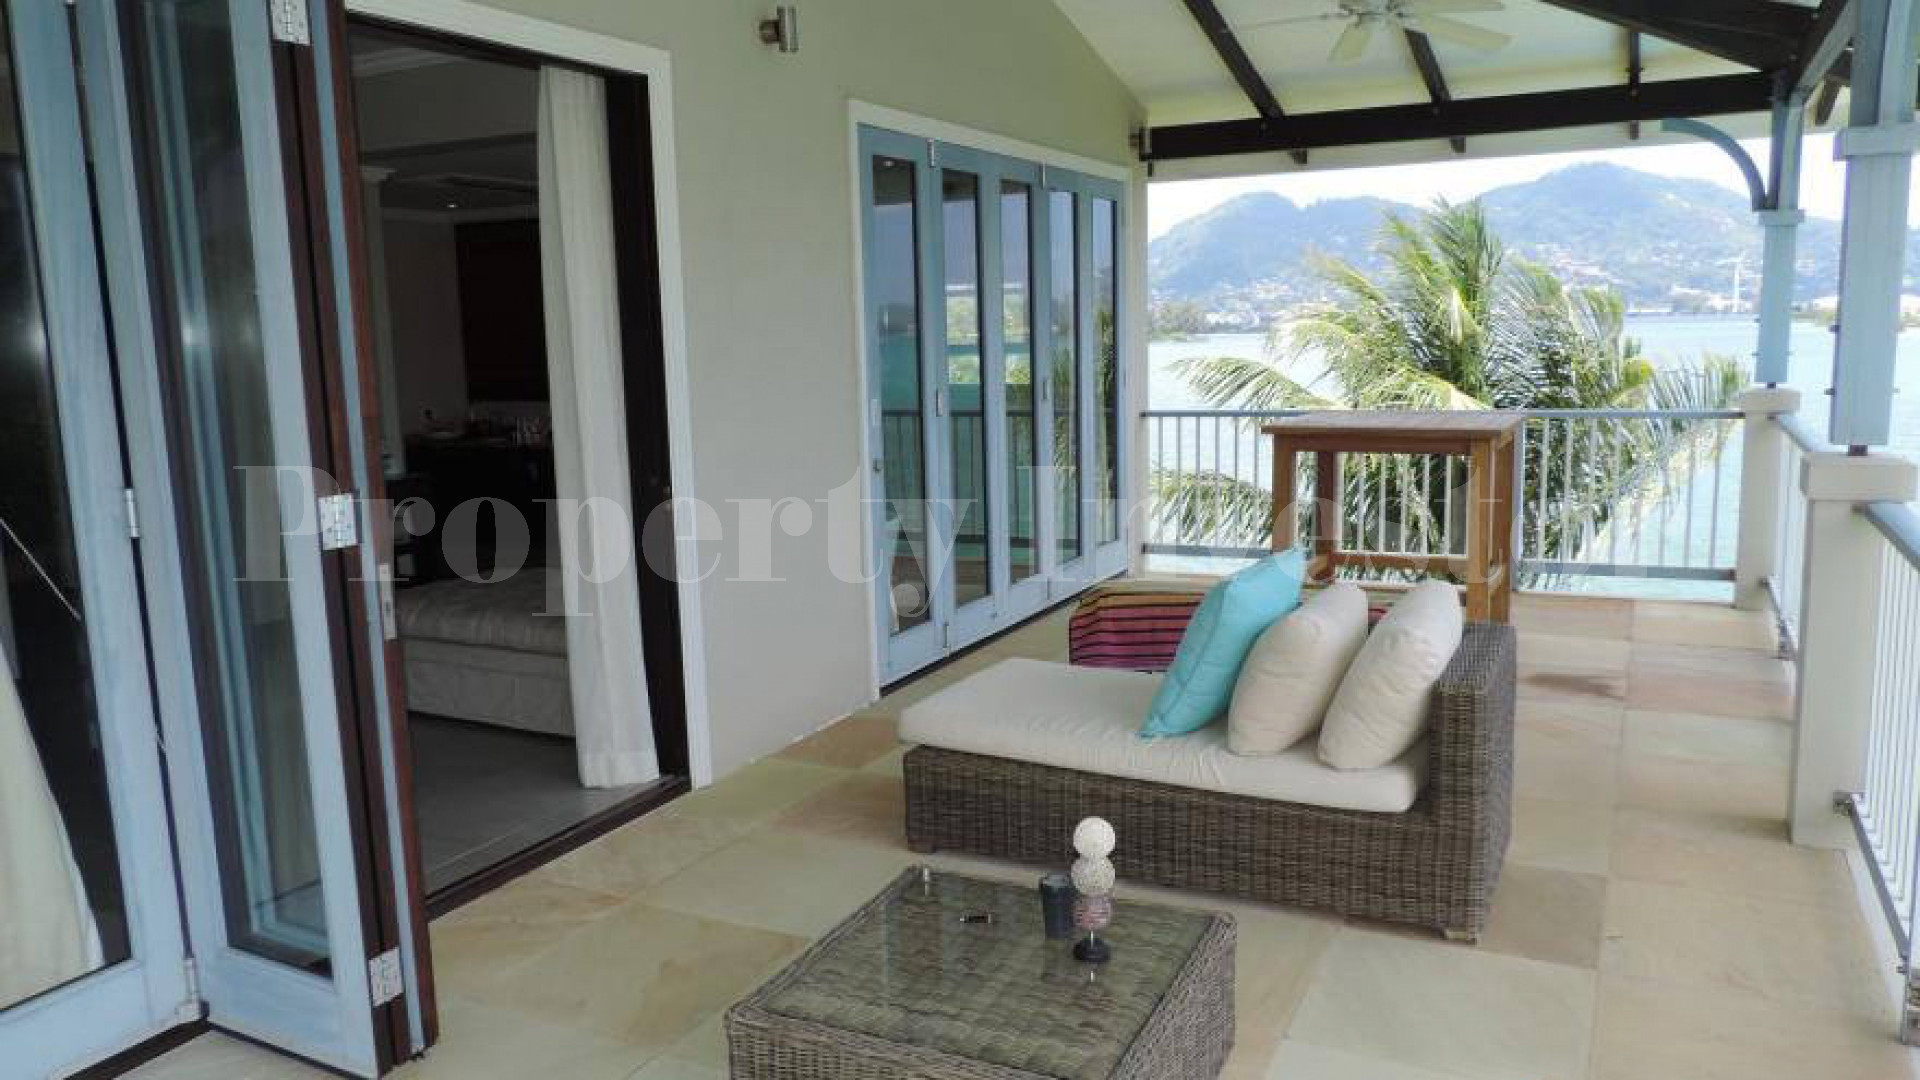 One-Of-A-Kind 8 Bedroom (6+2) Luxury Villa with Private Guest Cottage for Sale on Eden Island, Seychelles